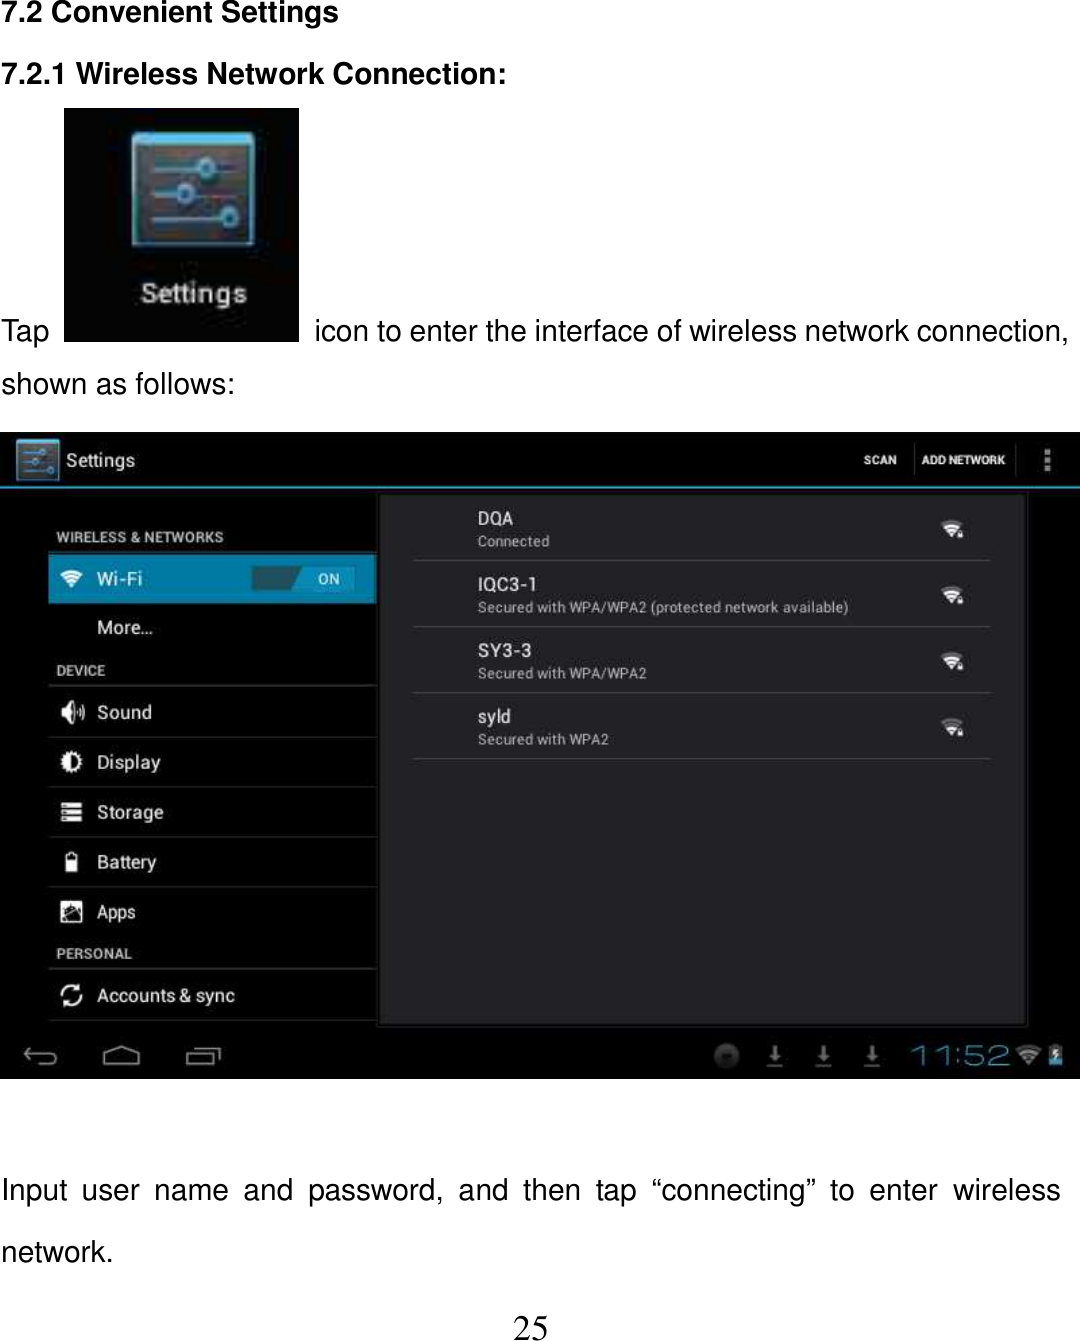   25  7.2 Convenient Settings 7.2.1 Wireless Network Connection: Tap    icon to enter the interface of wireless network connection, shown as follows:   Input  user  name  and  password,  and  then  tap  “connecting”  to  enter  wireless network. 